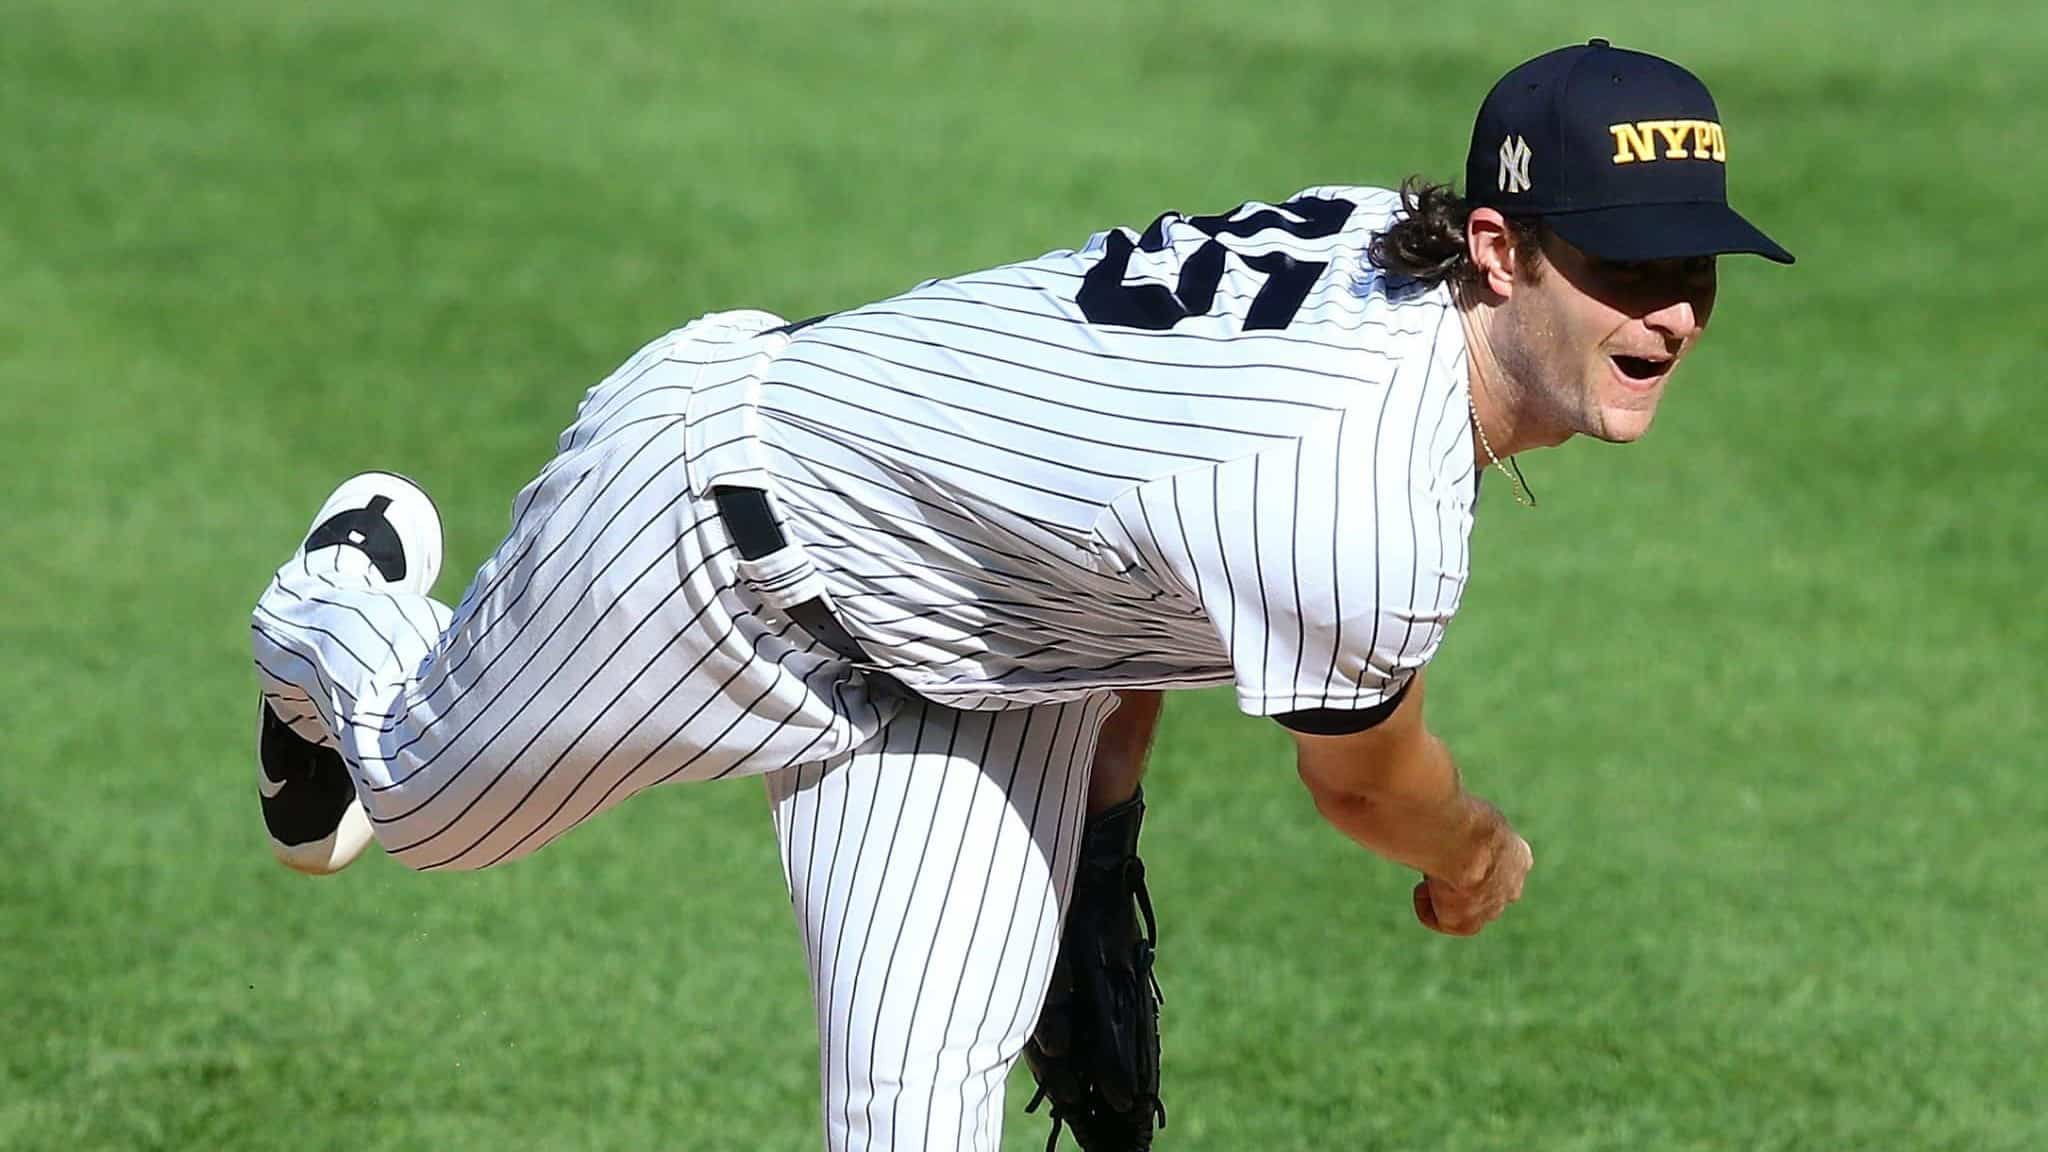 NEW YORK, NEW YORK - SEPTEMBER 11: Gerrit Cole #45 of the New York Yankees pitches in the first inning against the Baltimore Orioles at Yankee Stadium on September 11, 2020 in New York City.